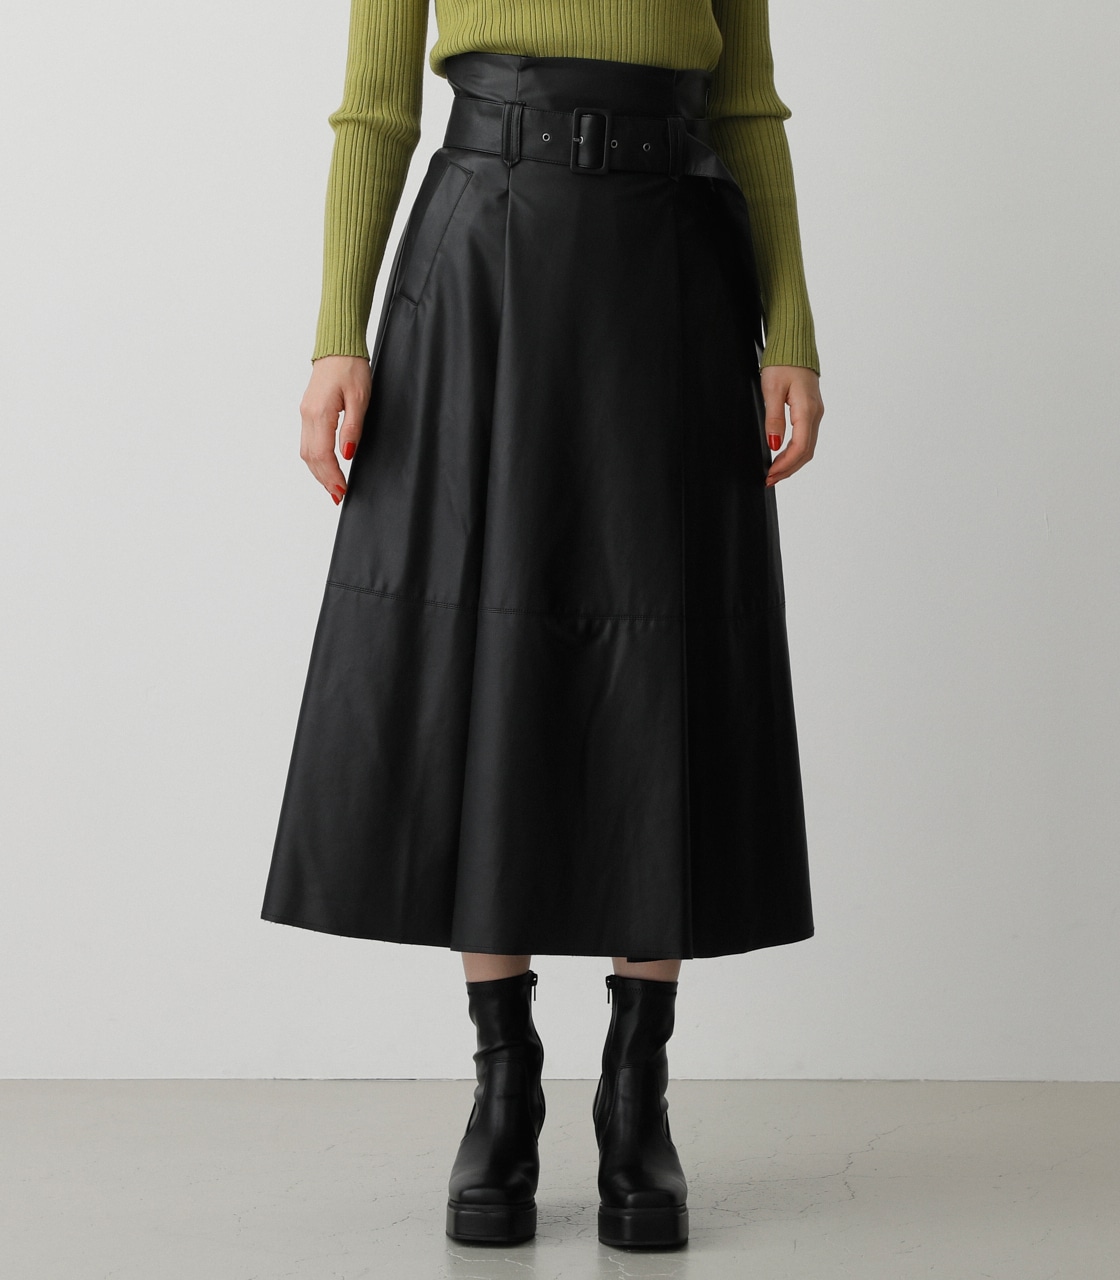 FAUX LEATHER HIGH WAIST SKIRT/フェイクレザーハイウエストスカート 詳細画像 BLK 5